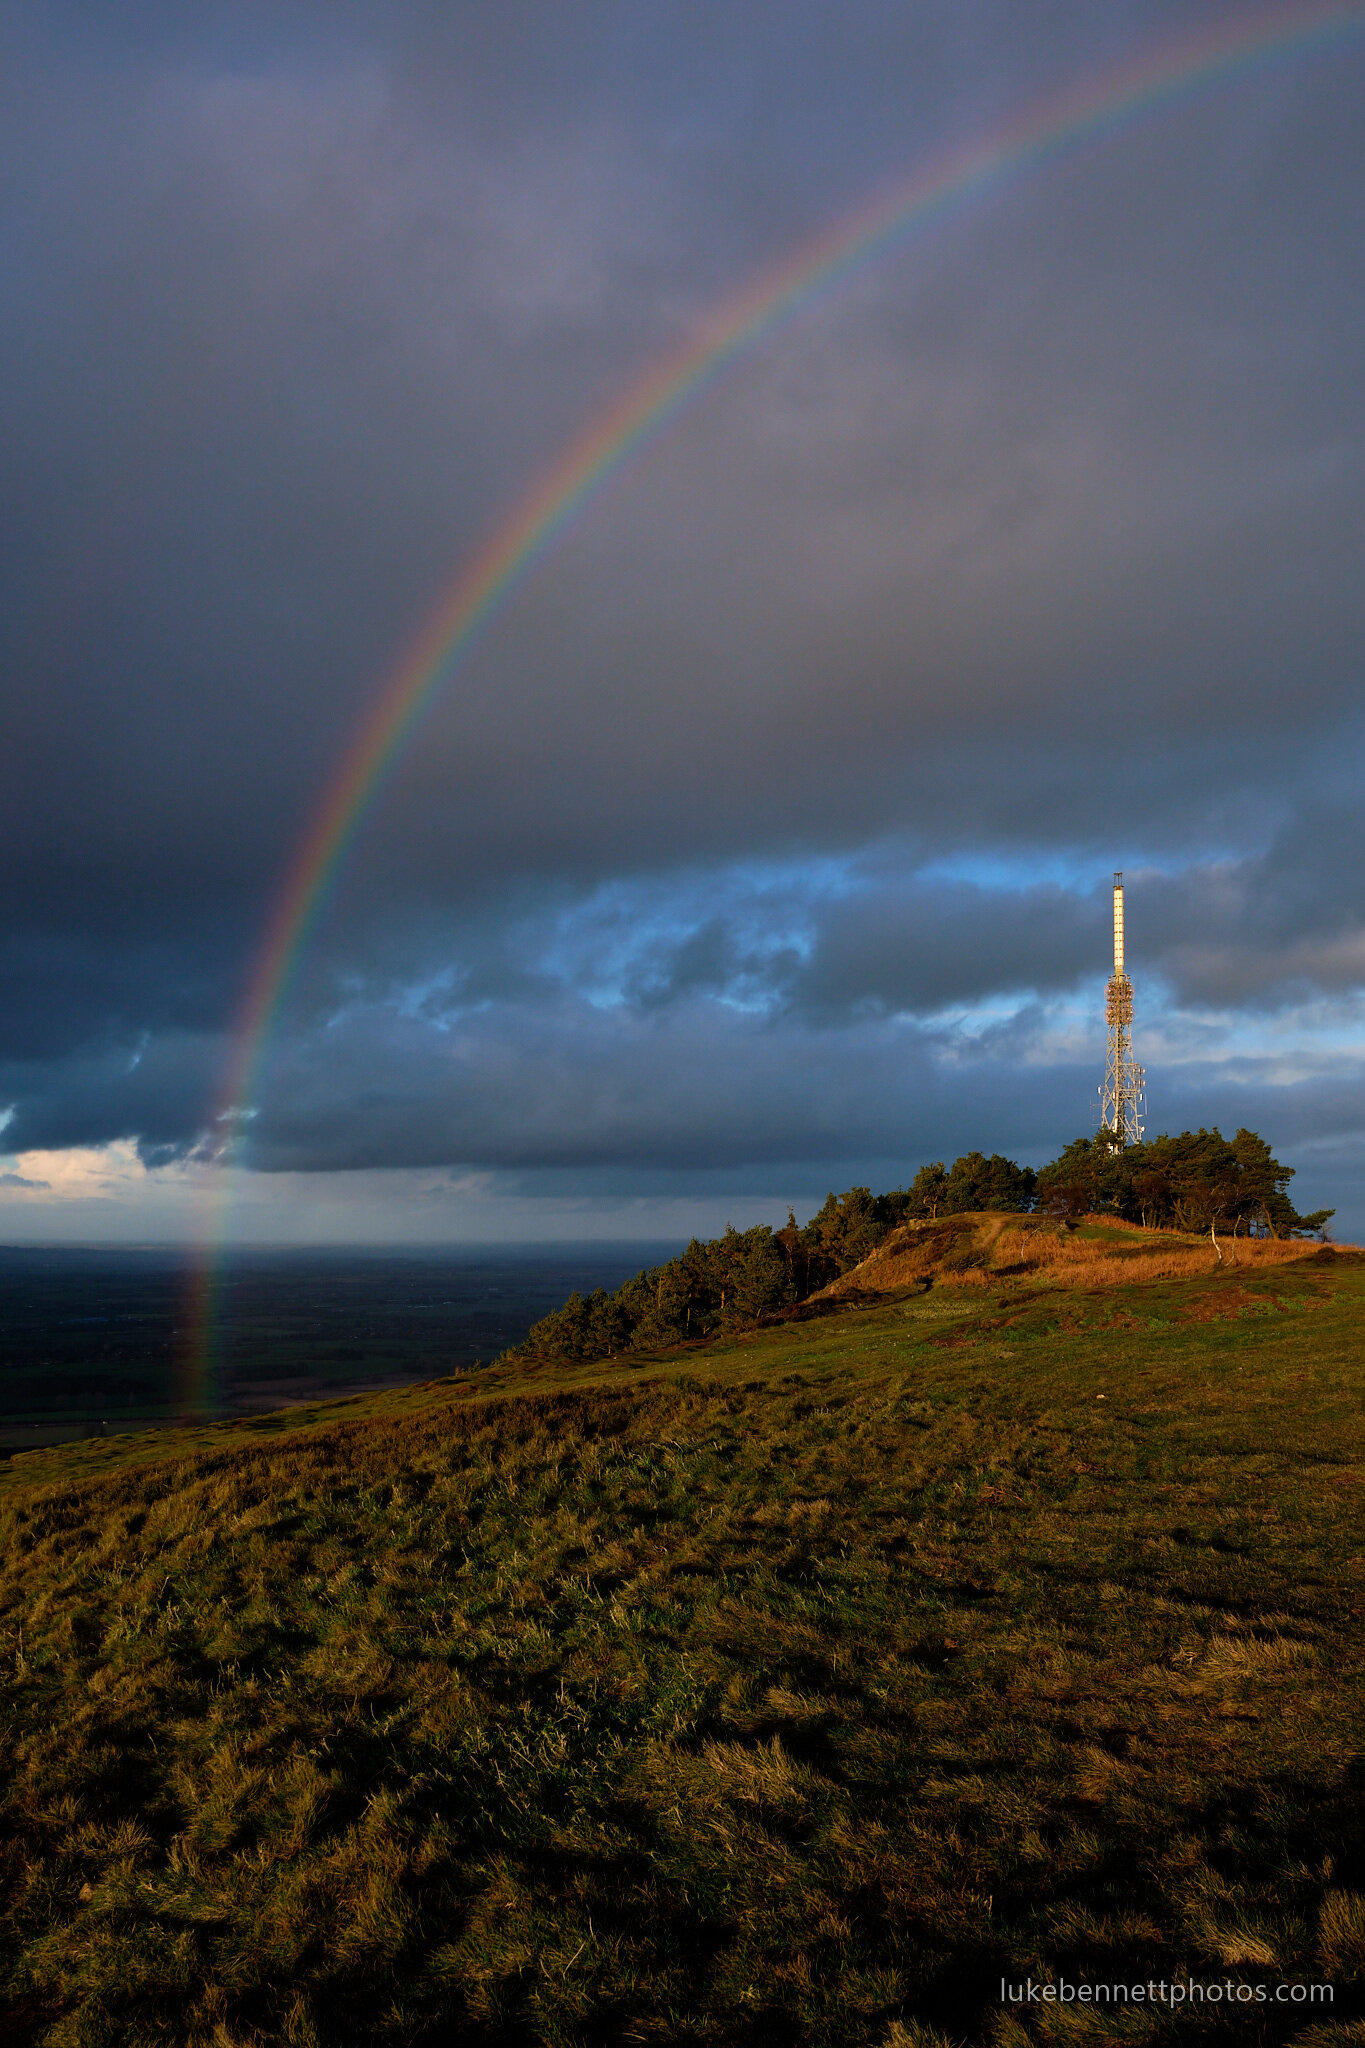  One of those times you regret not taking your ultra wide lens for full rainbow action.  www.lukebennettphotos.com 